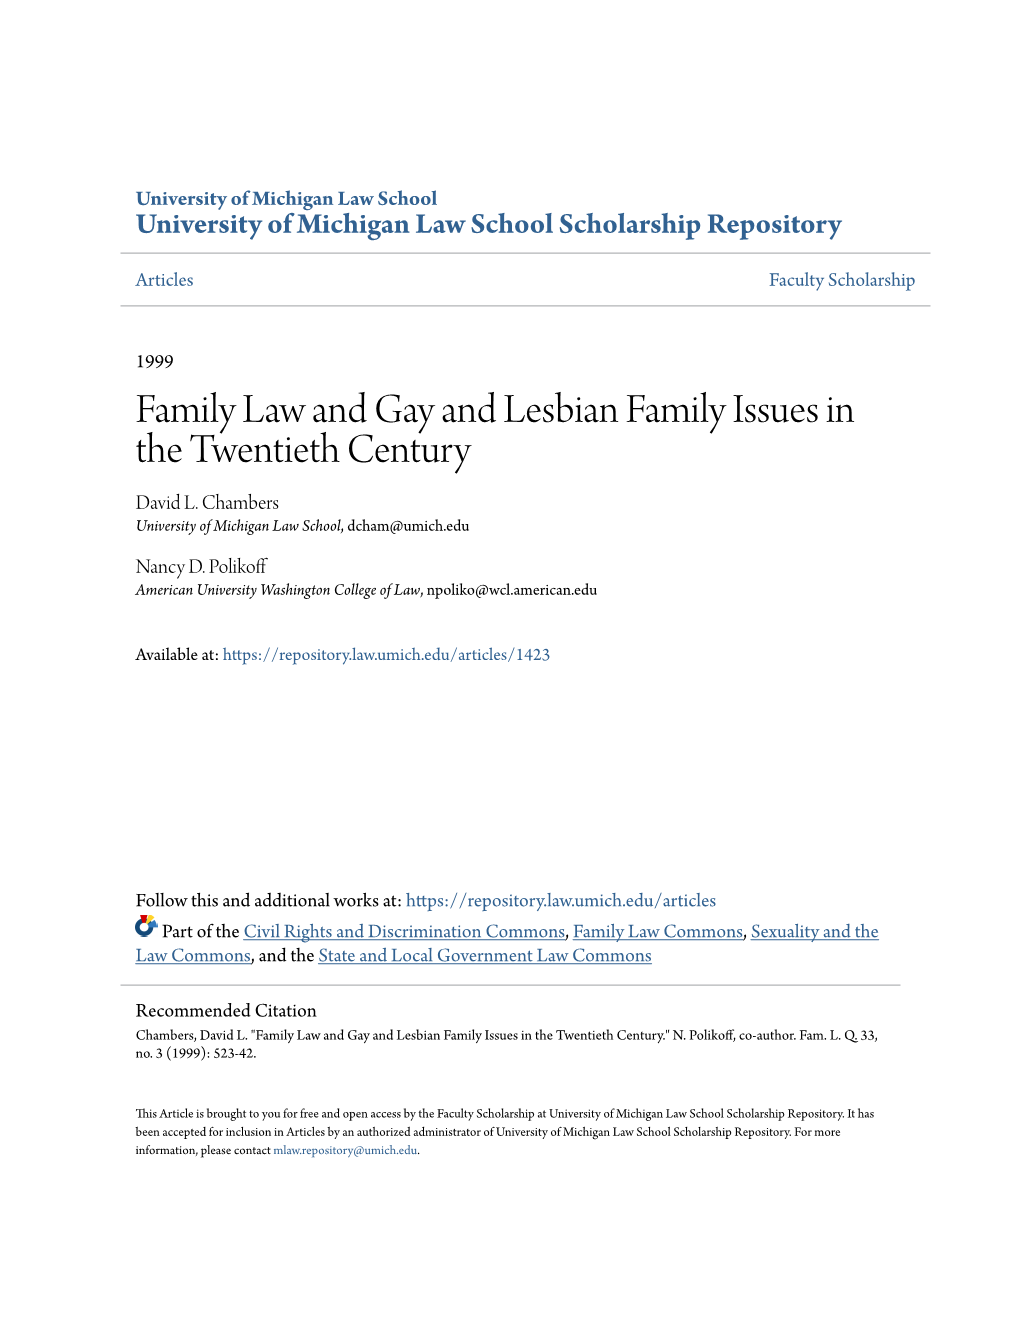 Family Law and Gay and Lesbian Family Issues in the Twentieth Century David L